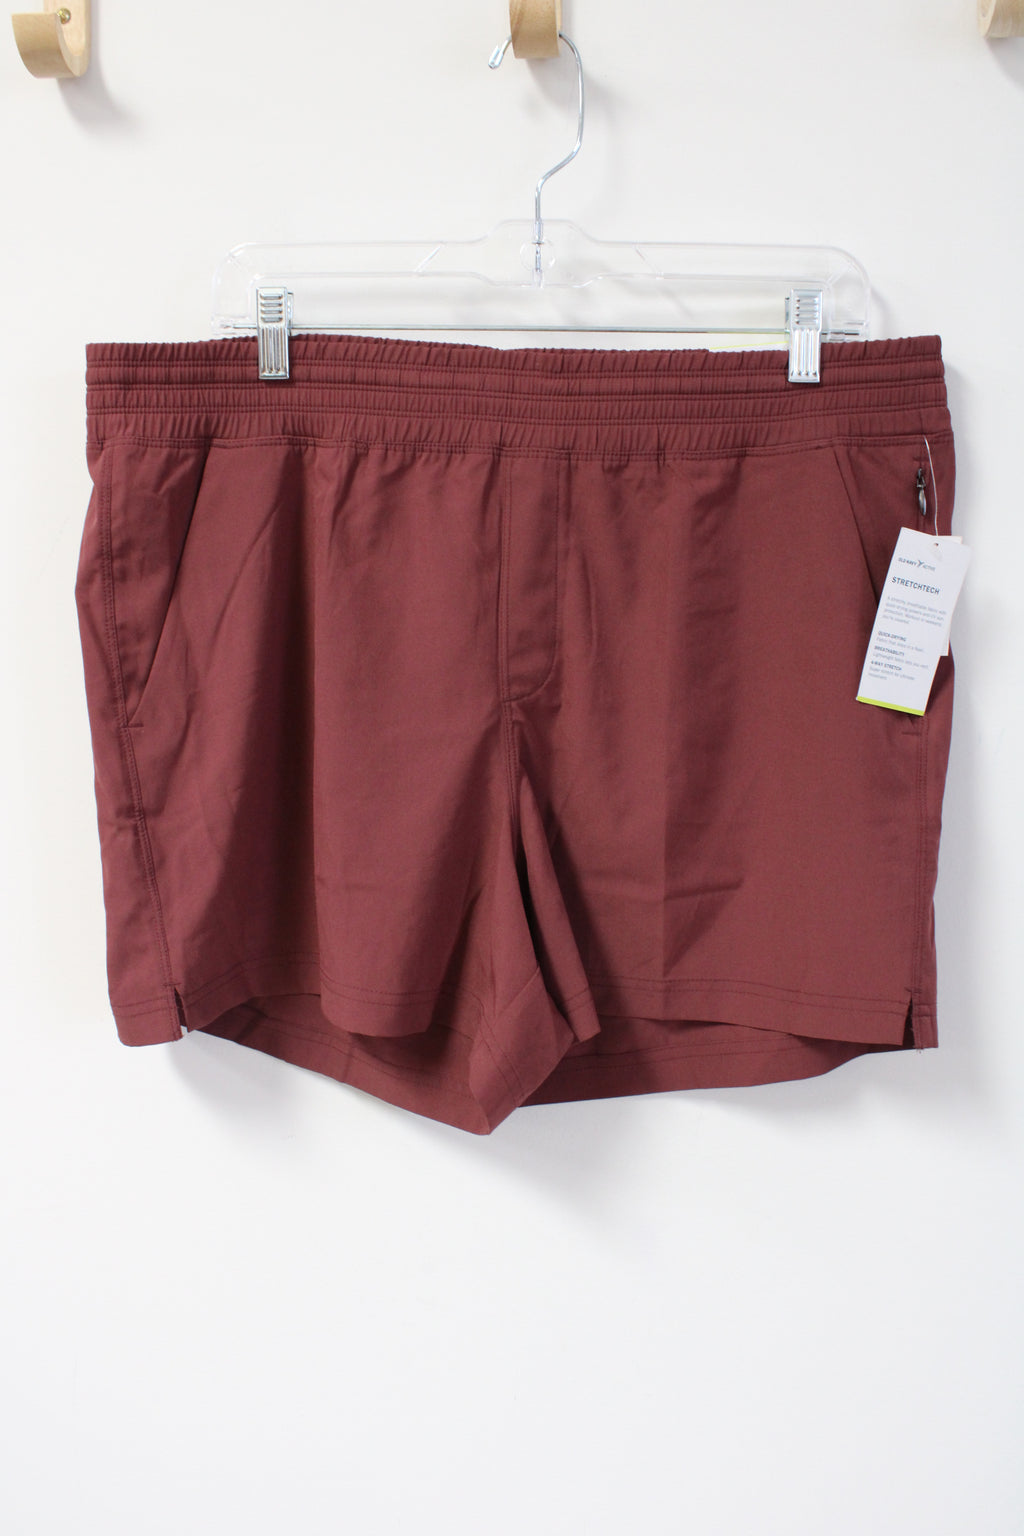 NEW Old Navy Dusty Red StretchTech Shorts | L